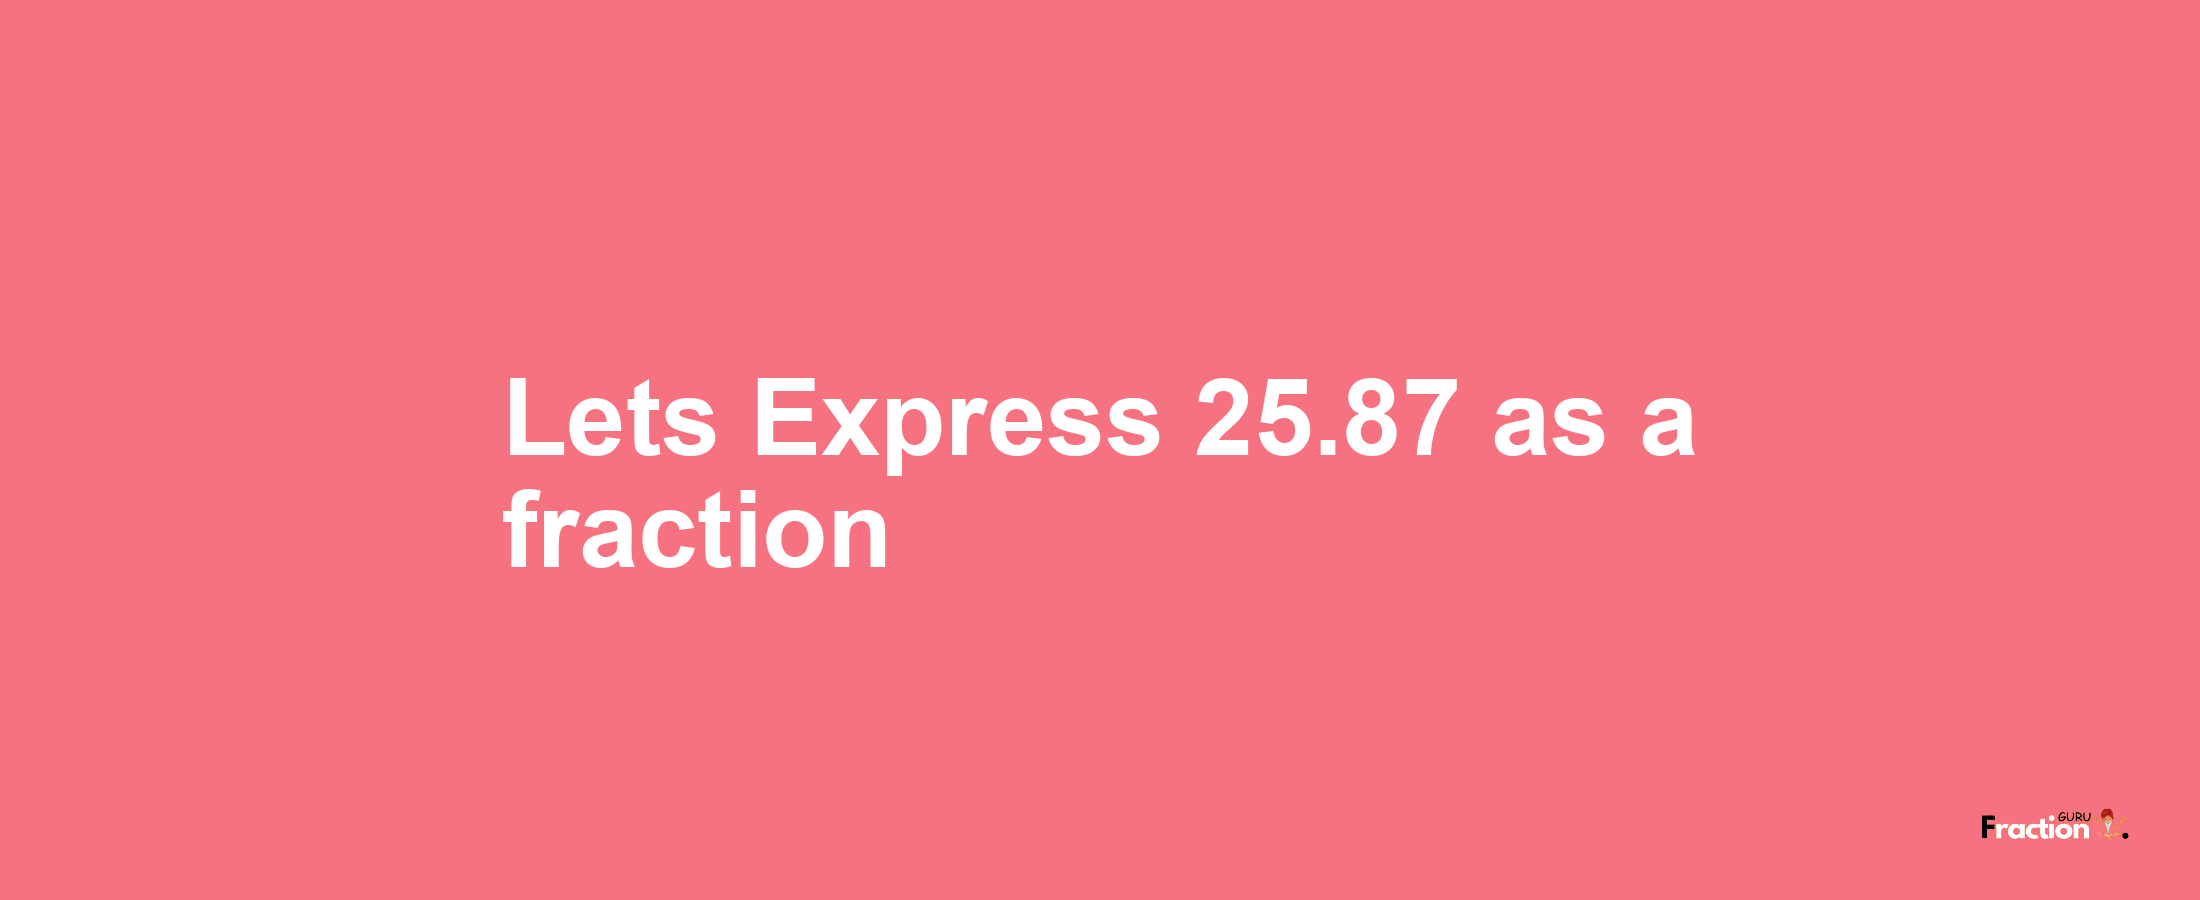 Lets Express 25.87 as afraction